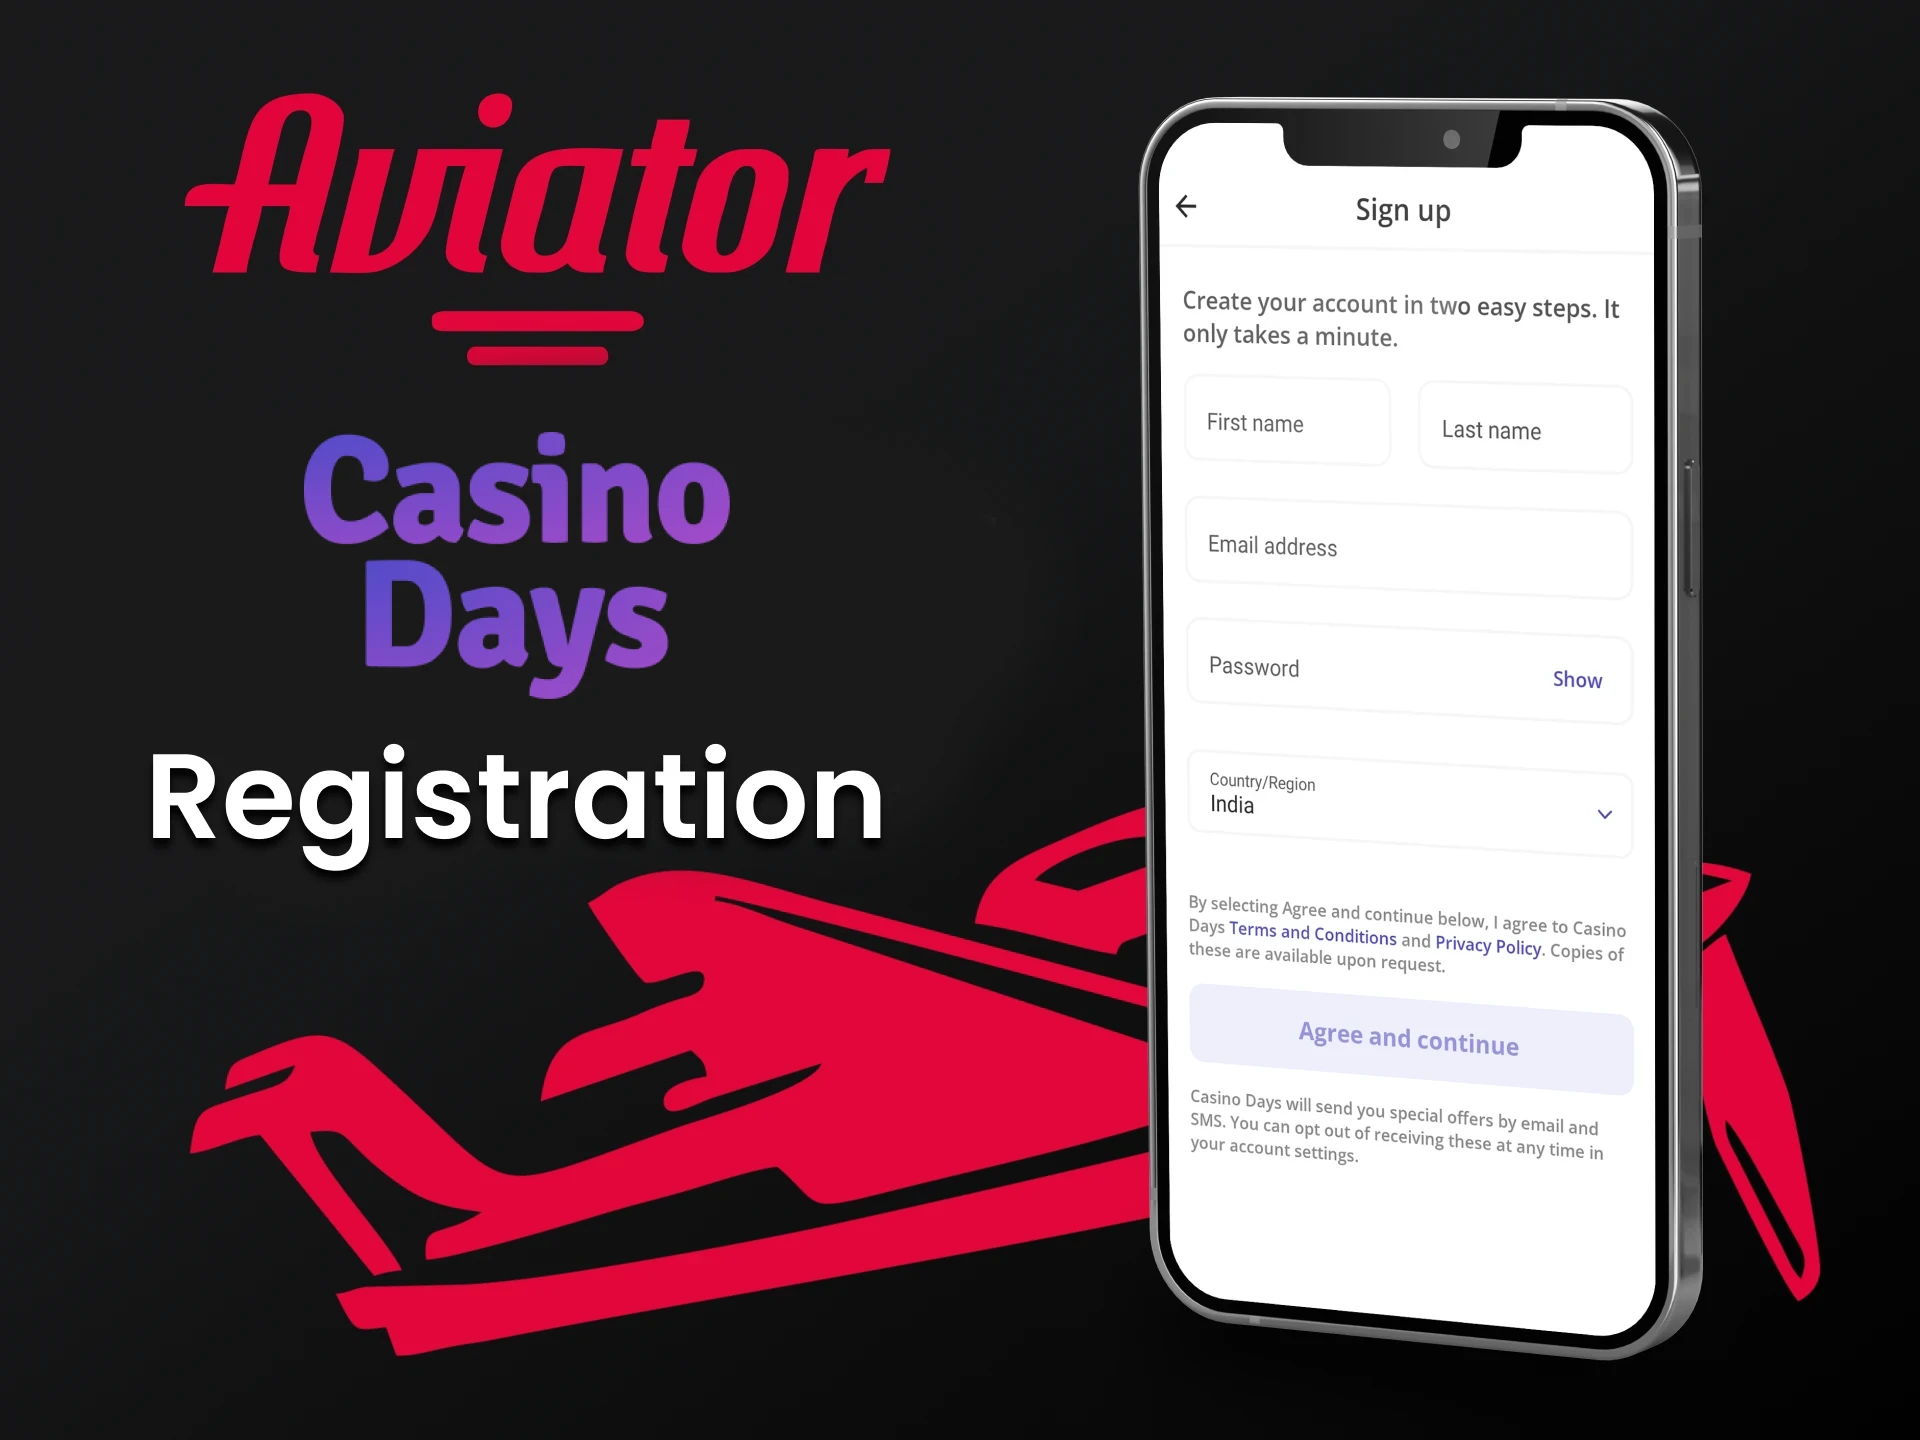 Create a personal account to play Aviator in the Casino Days application.